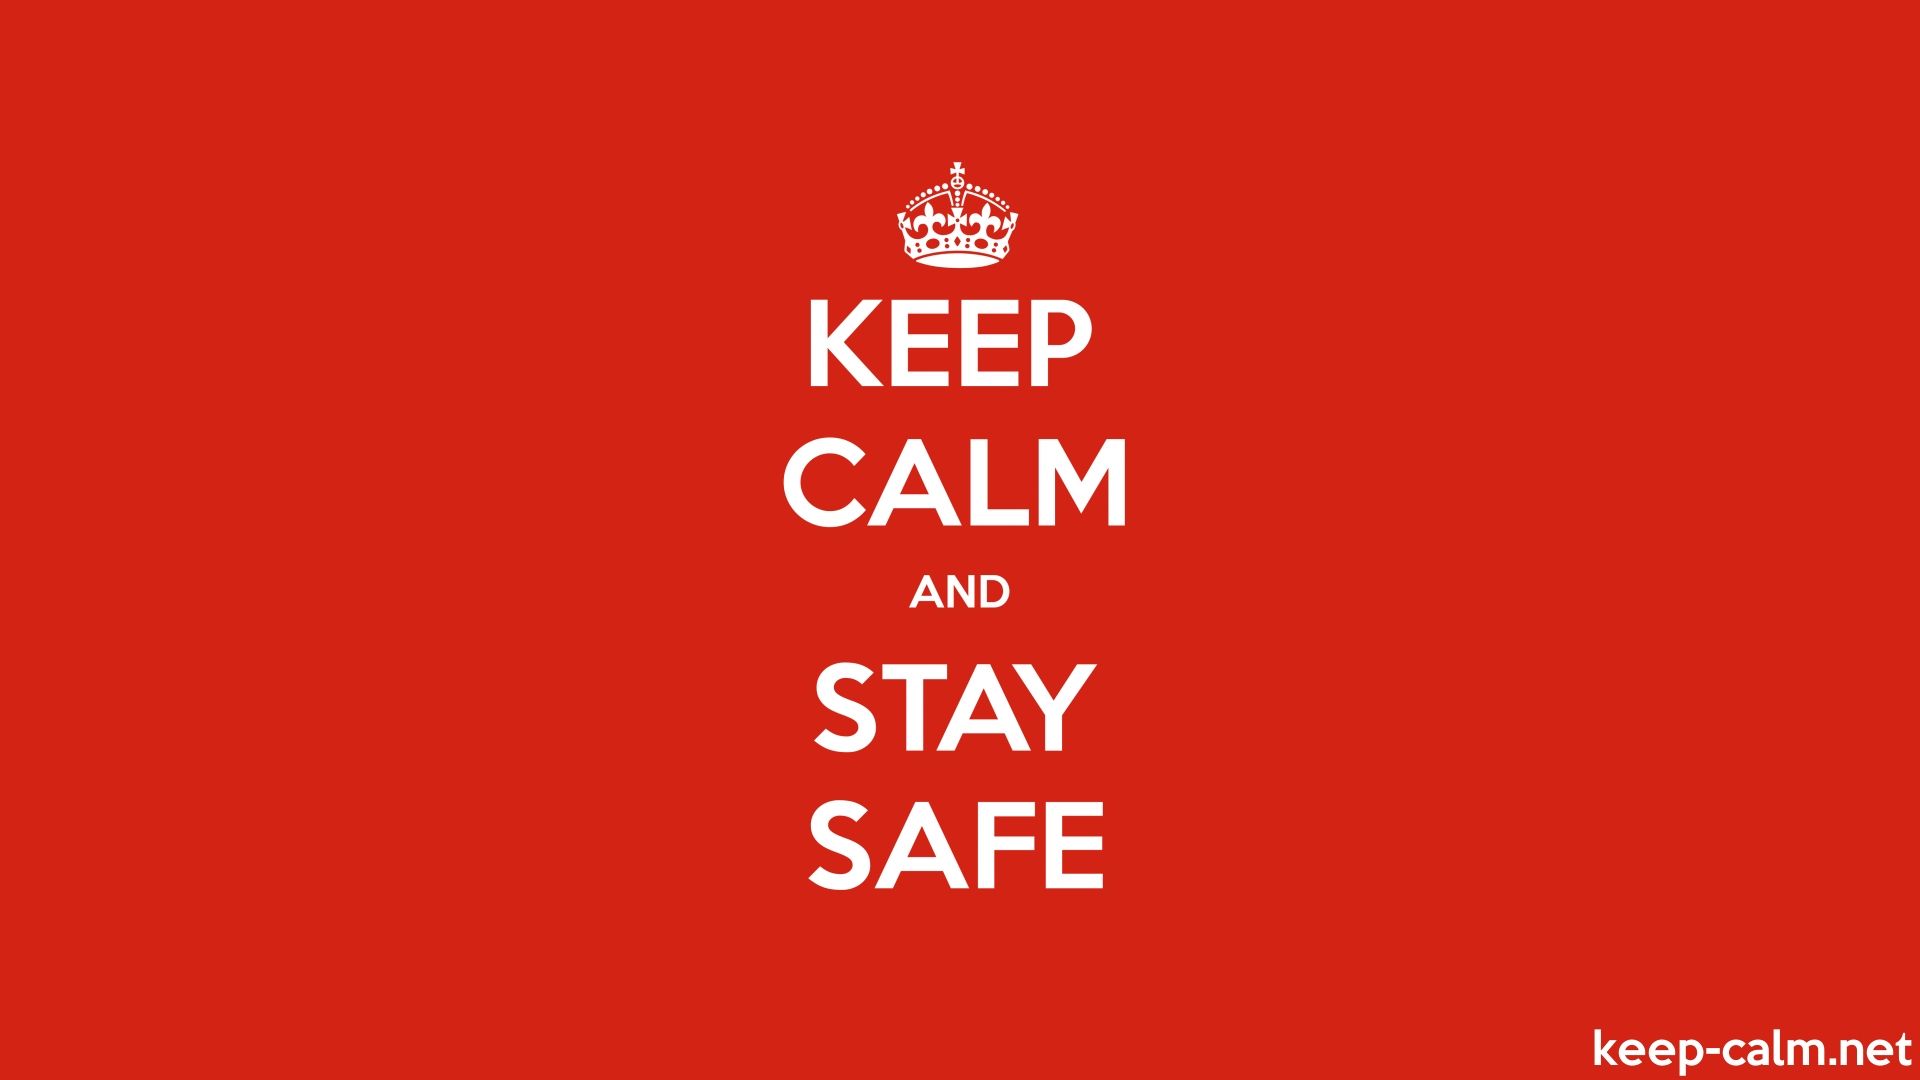 KEEP CALM AND STAY SAFE